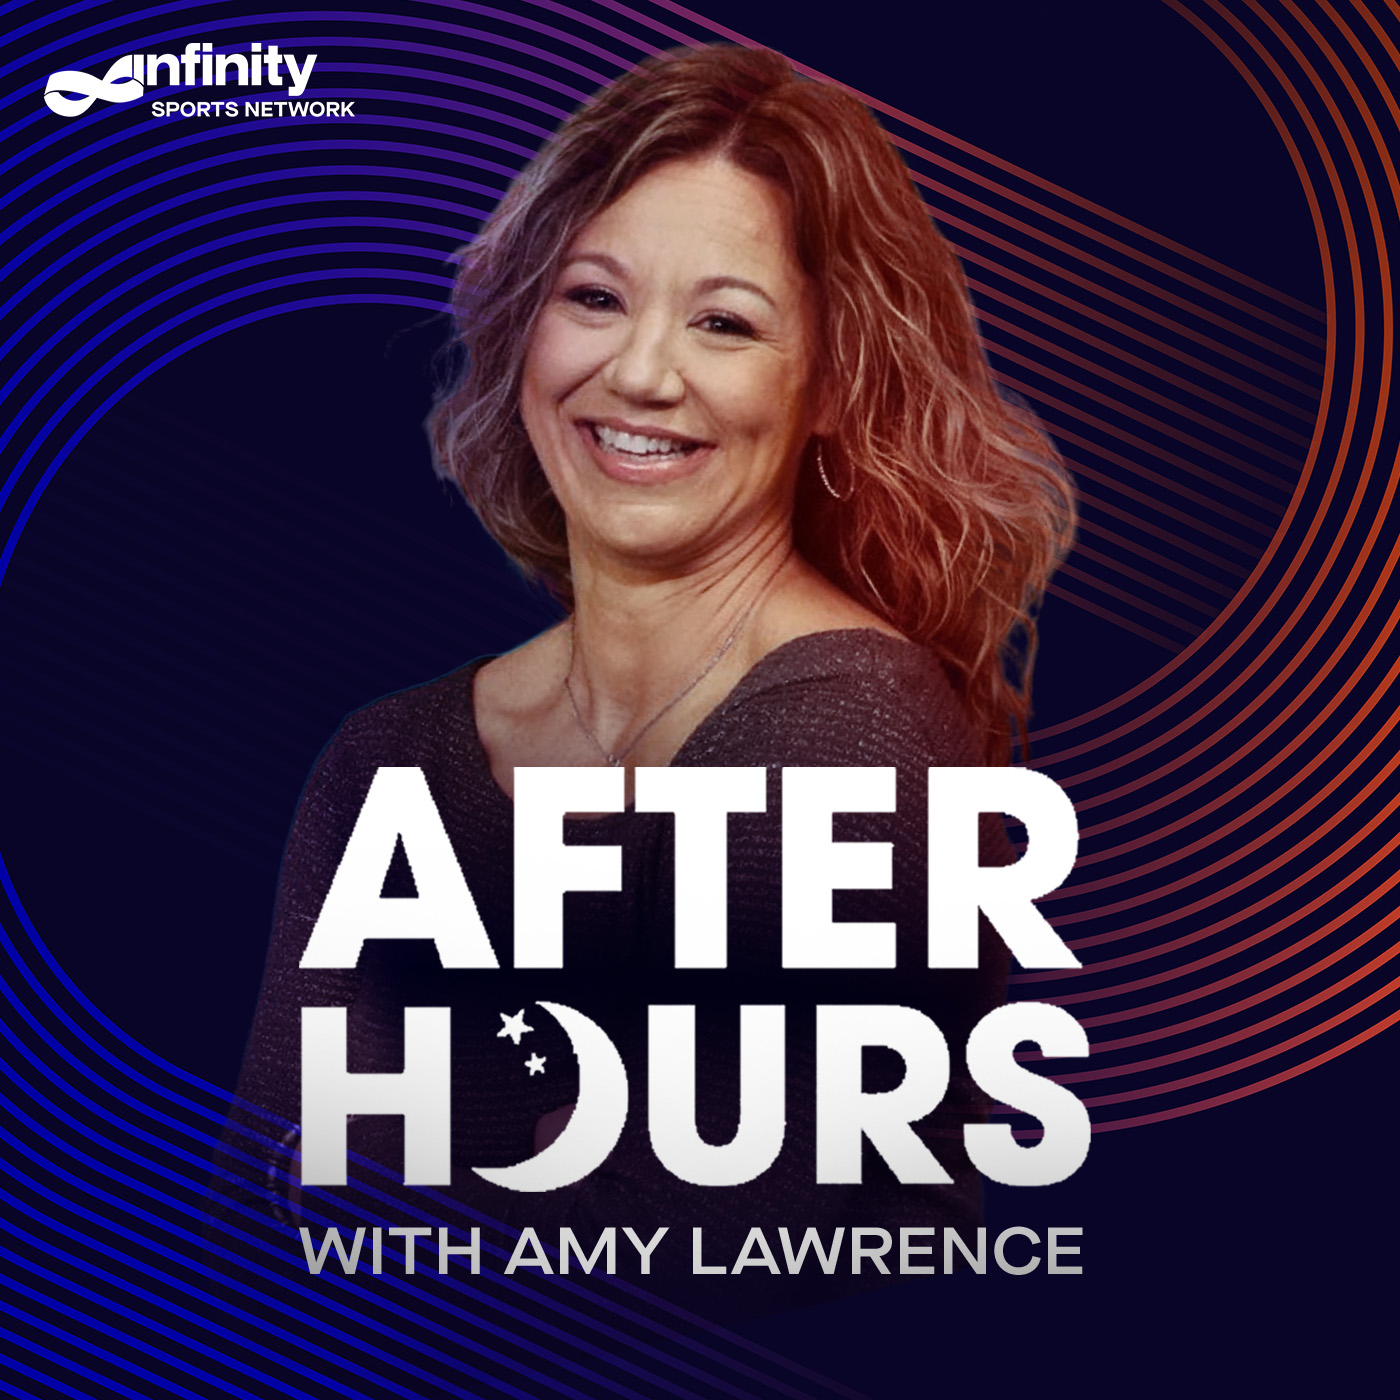 8-20-21 After Hours with Amy Lawrence PODCAST: Hour 4